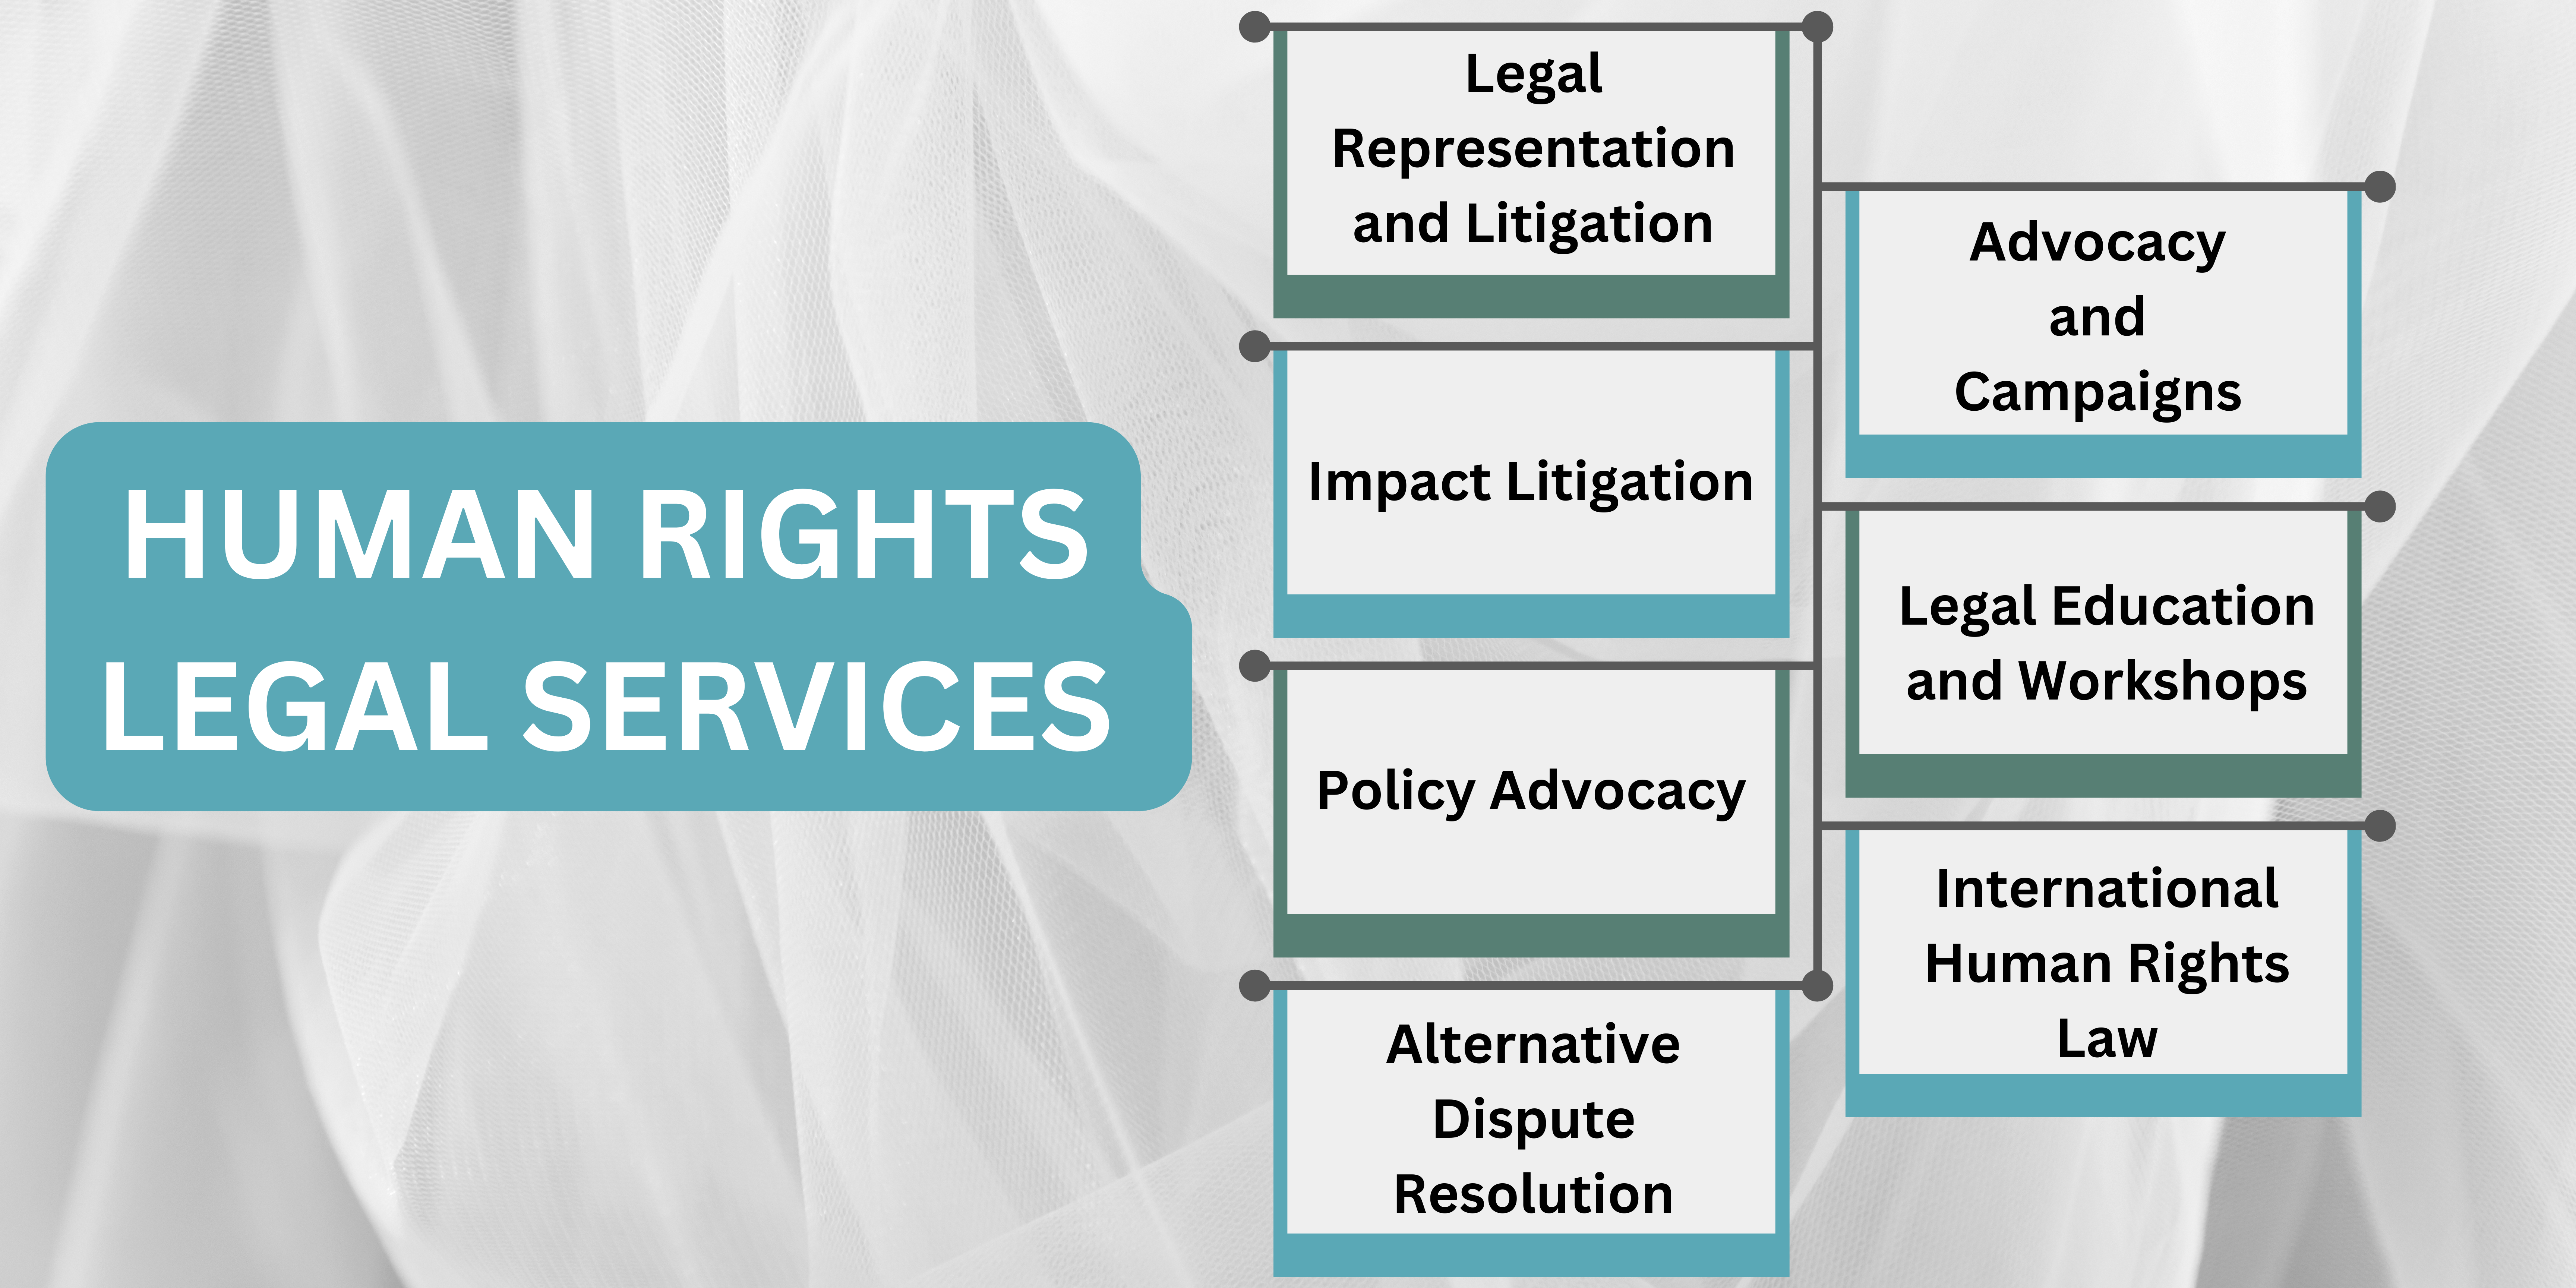 Human Rights Legal Services